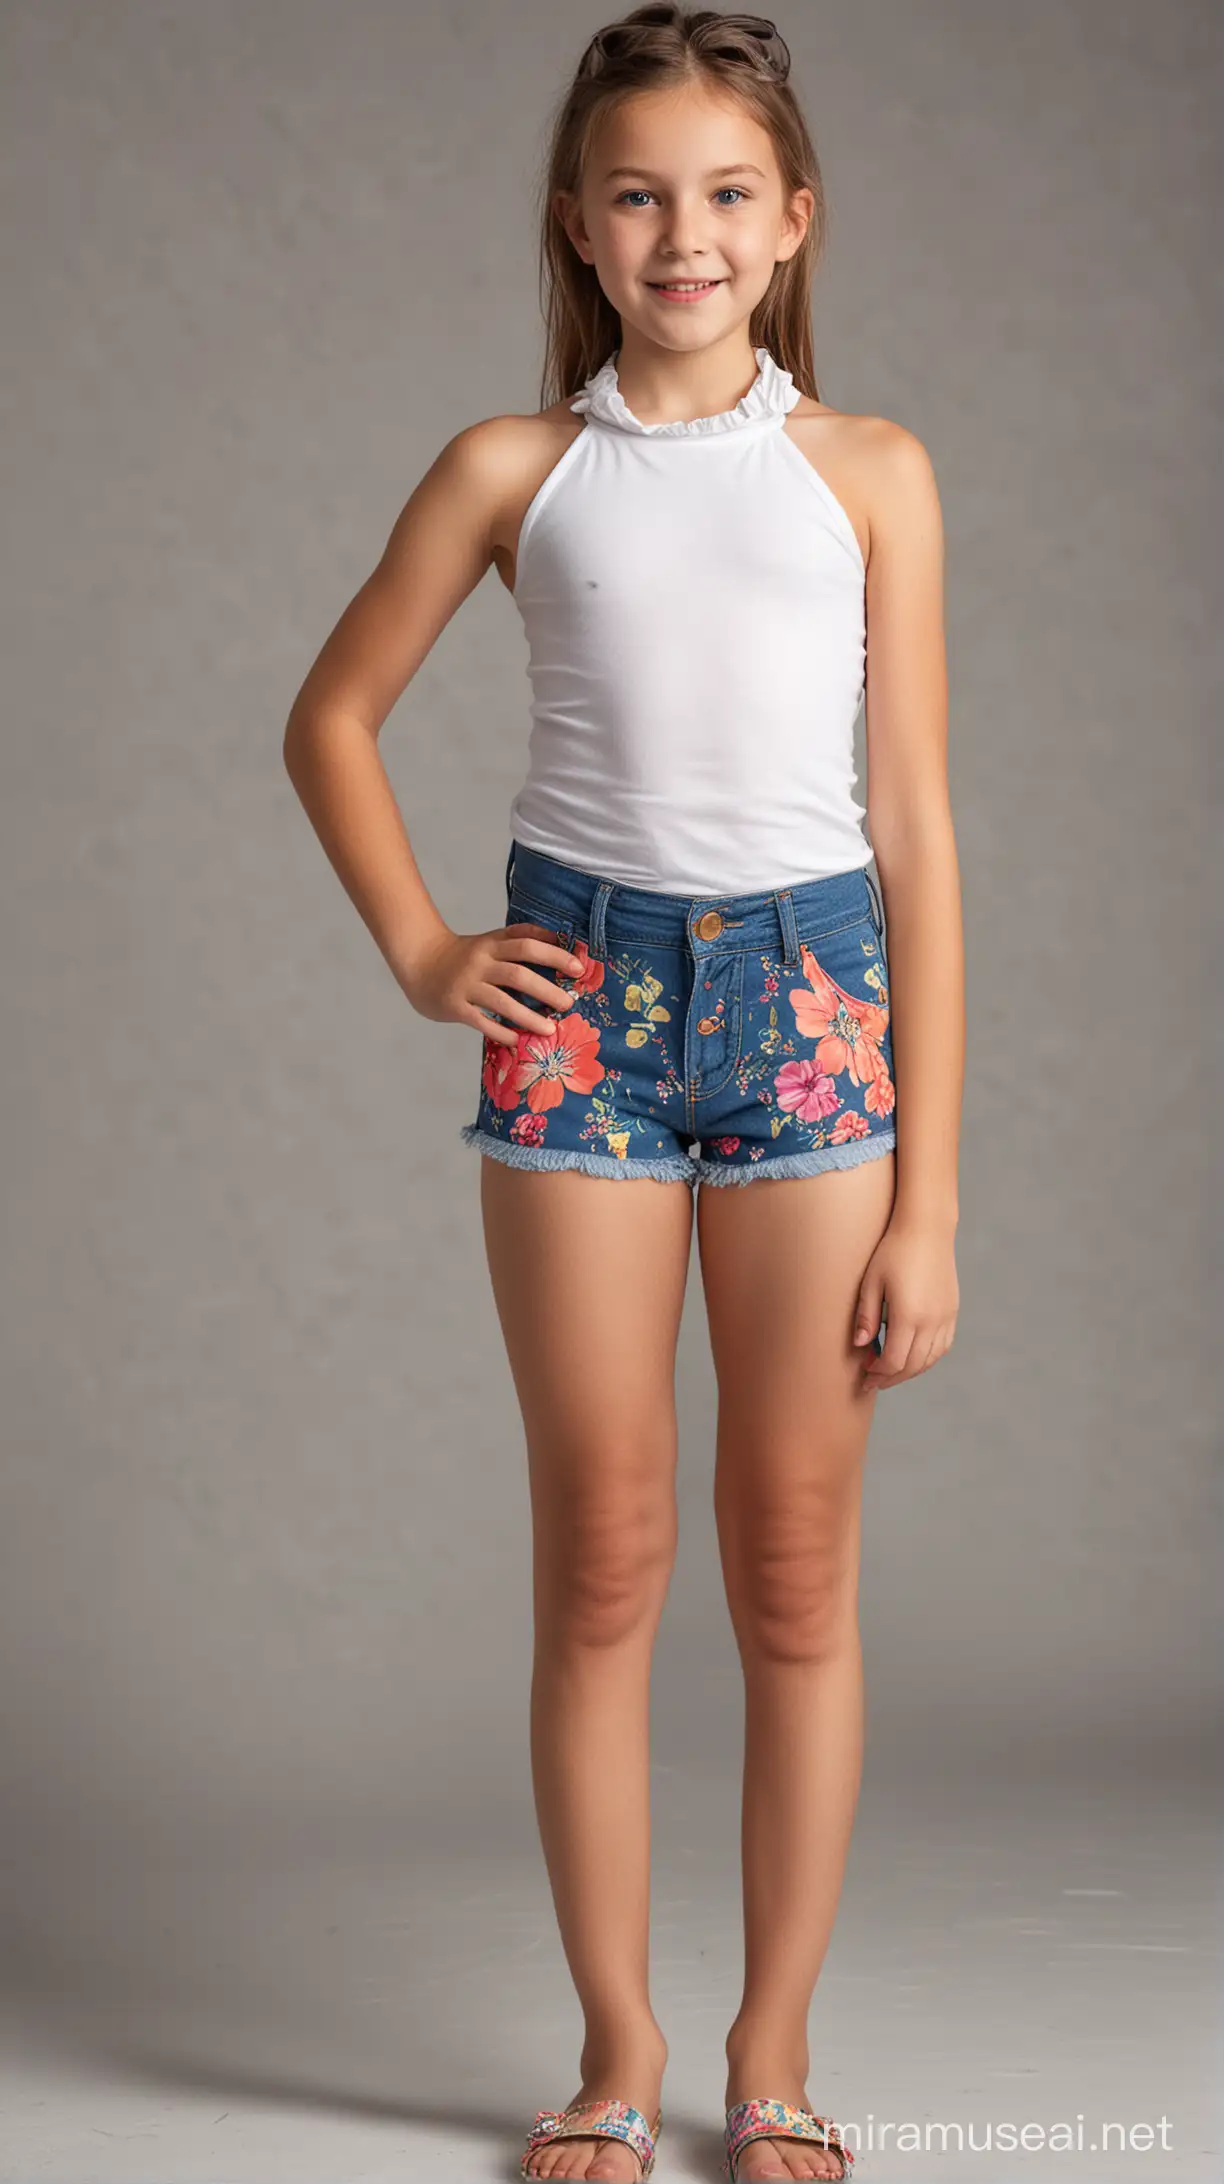 12 years old girl, wearing Halter Neck Top with short shorts